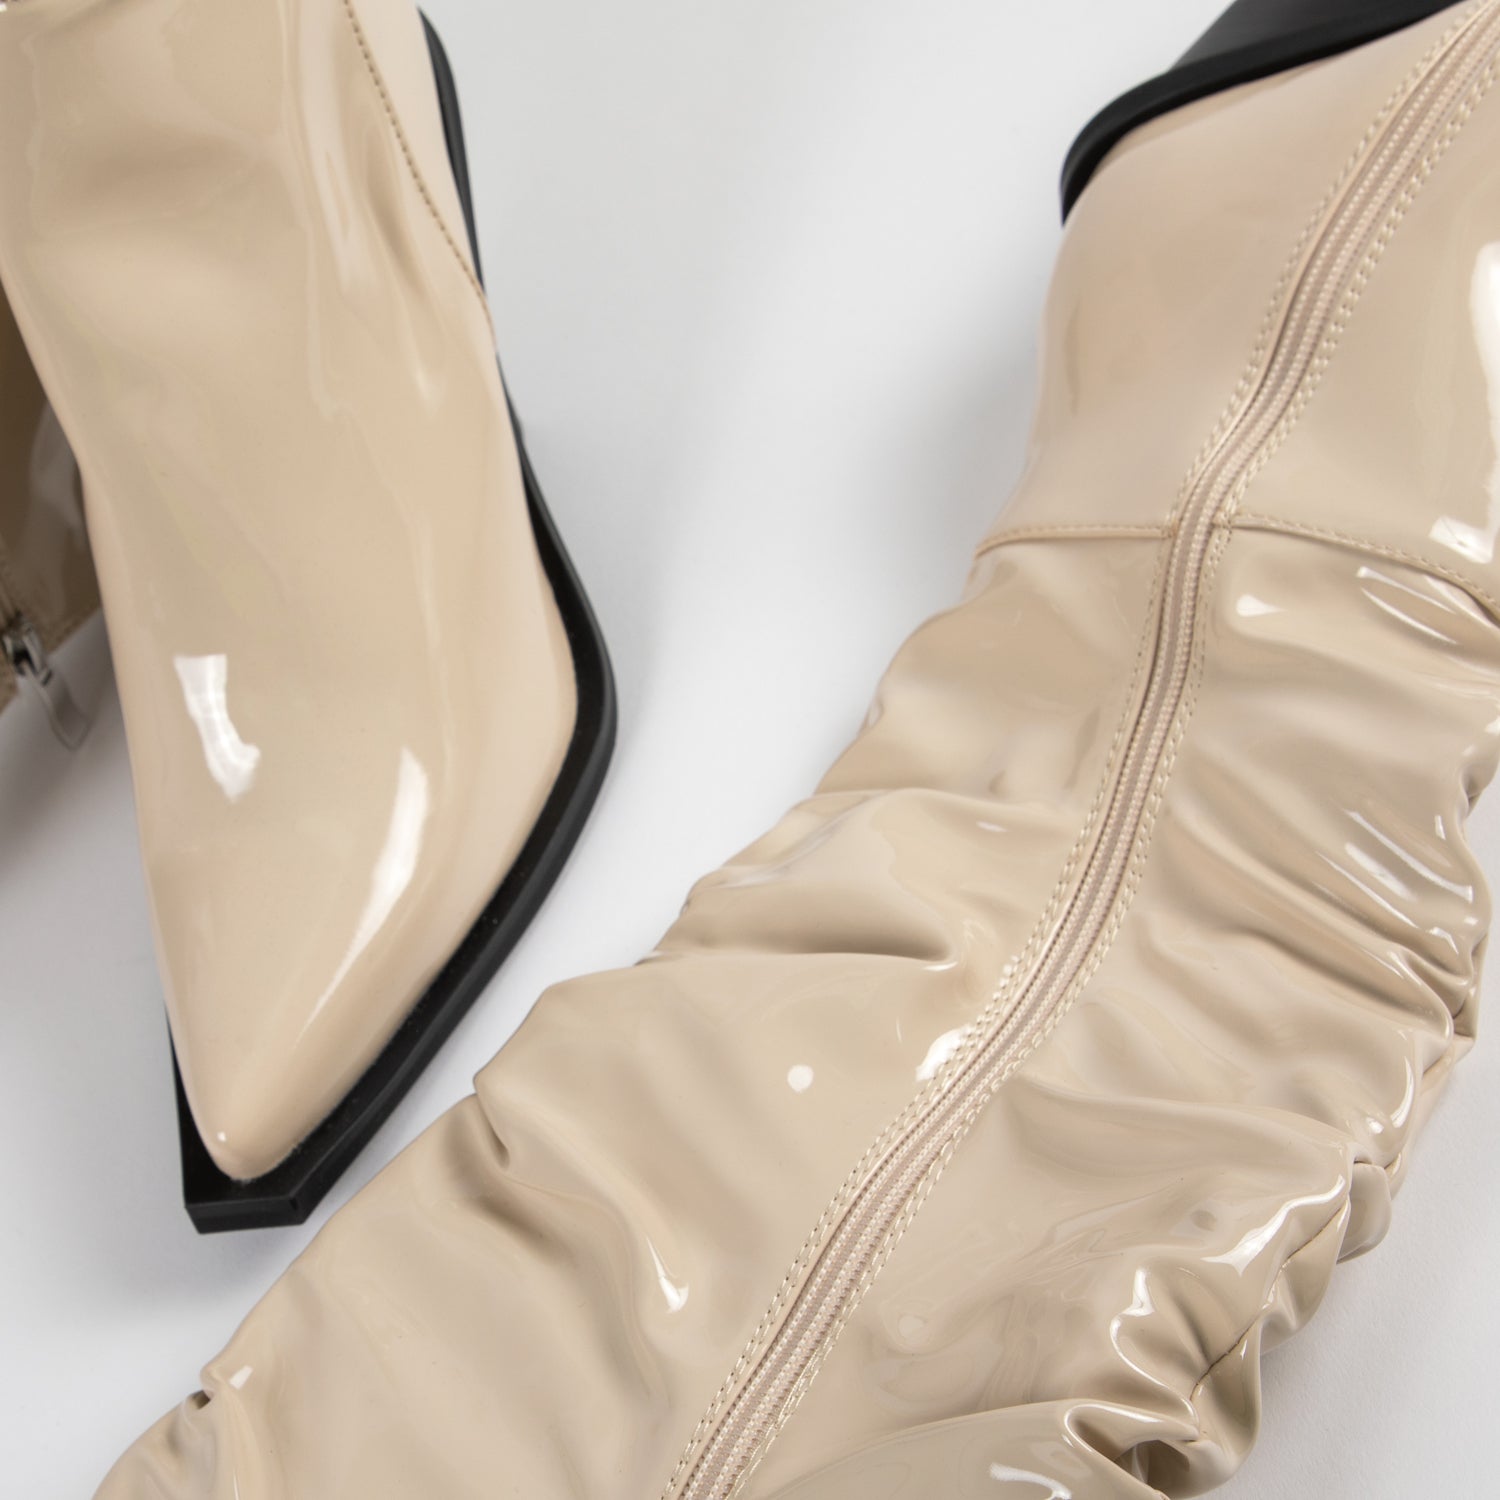 RAID Estacia Ruched Long Boot in Off White Patent